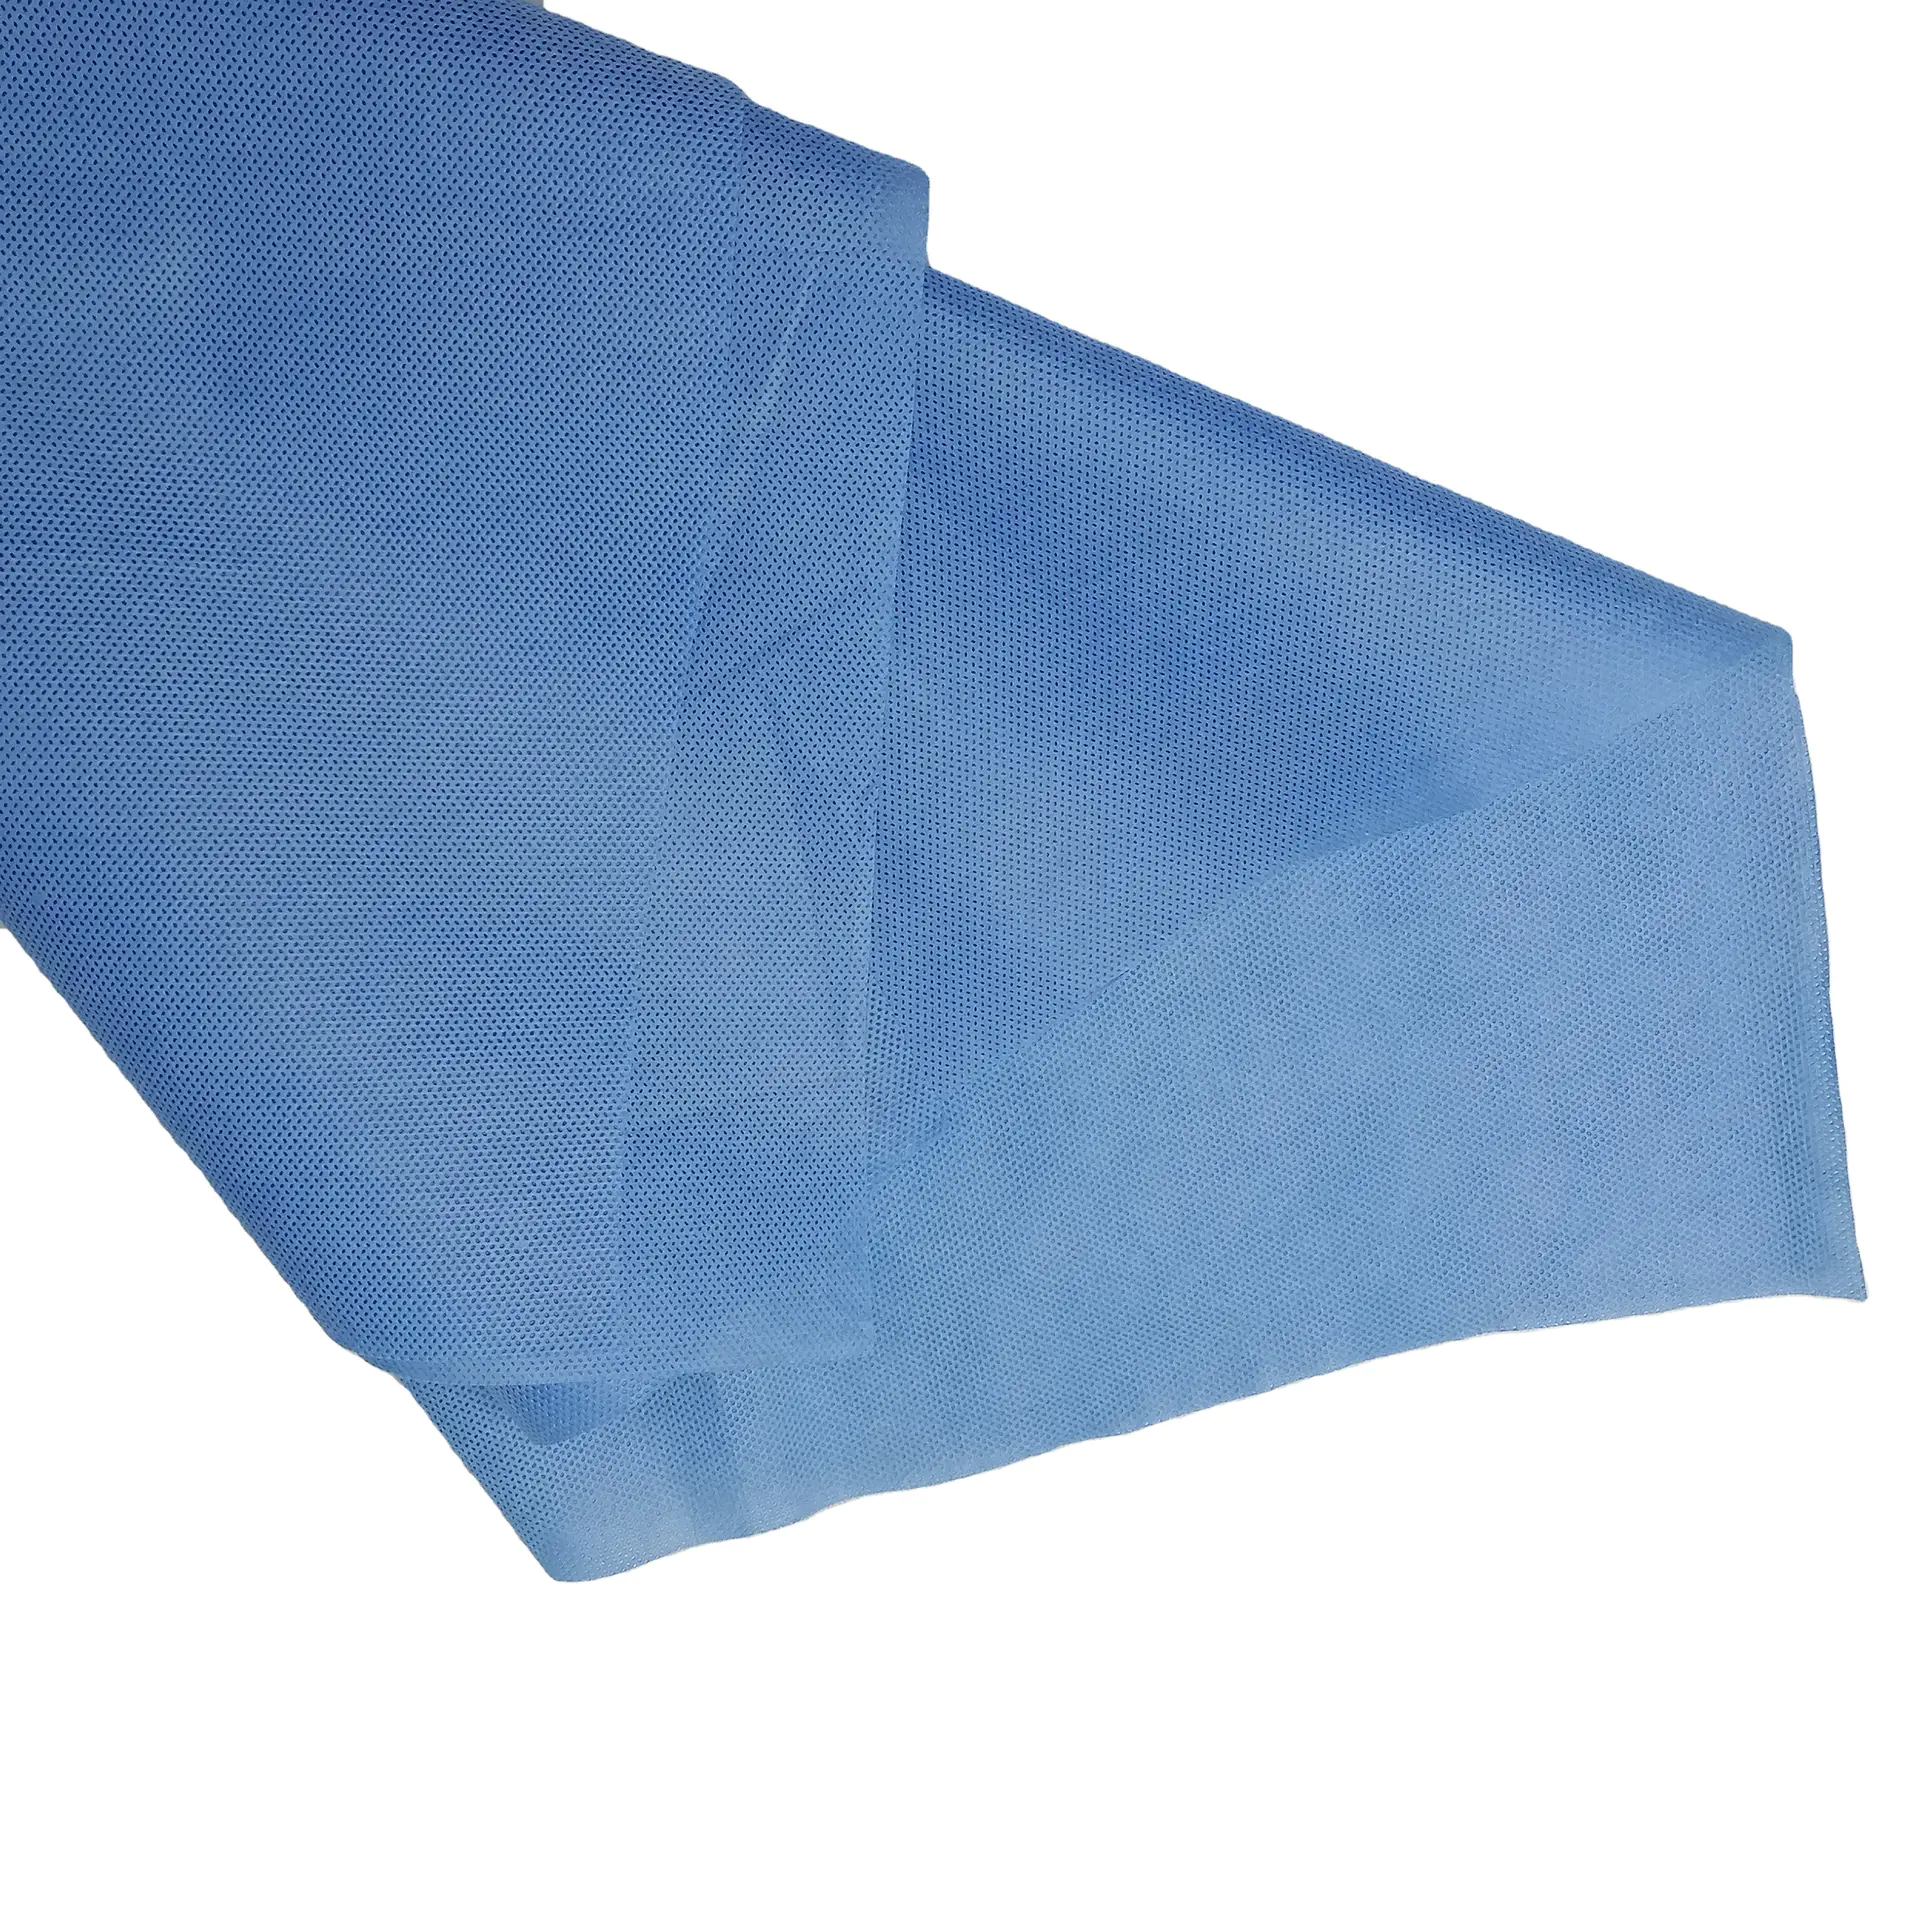 SMMS SMSnonwoven fabric for surgical gown